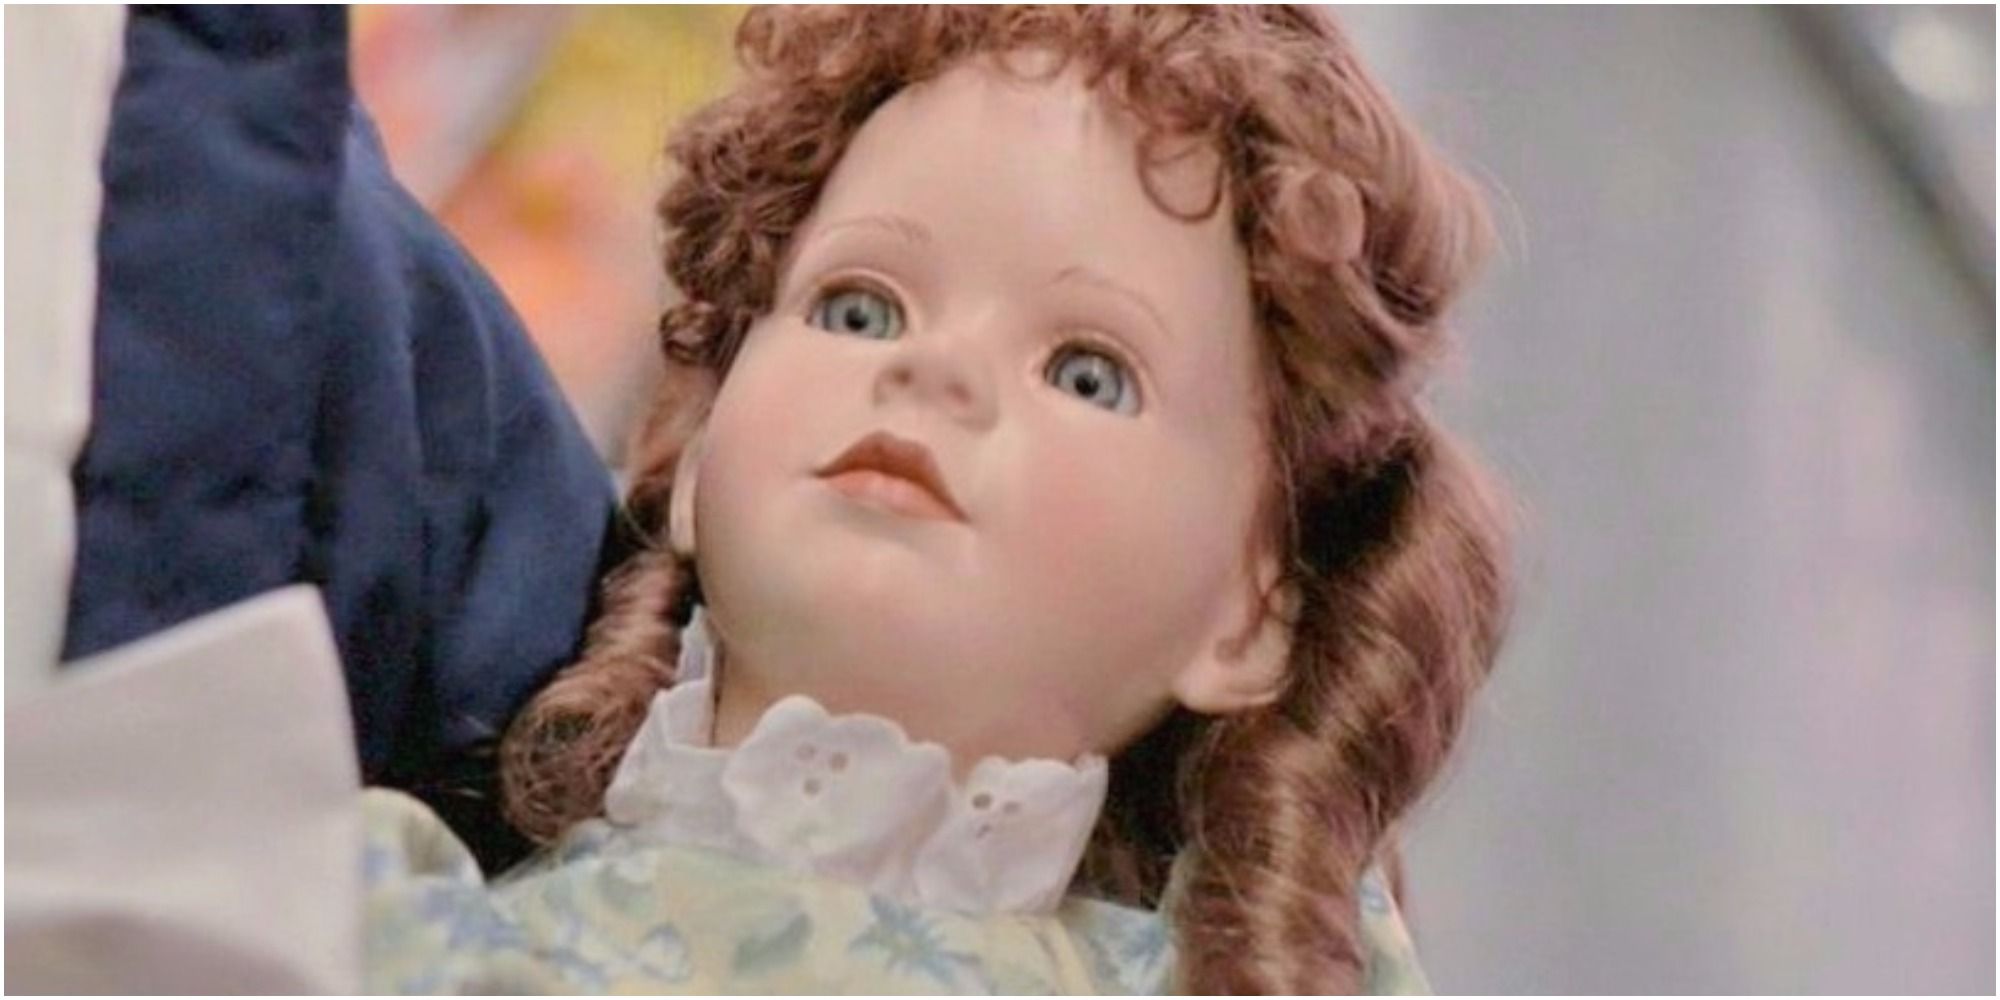 Stephen King wrote an X Files episode about an evil doll named Chinga. Screenrant by Evan J. Pretzer.